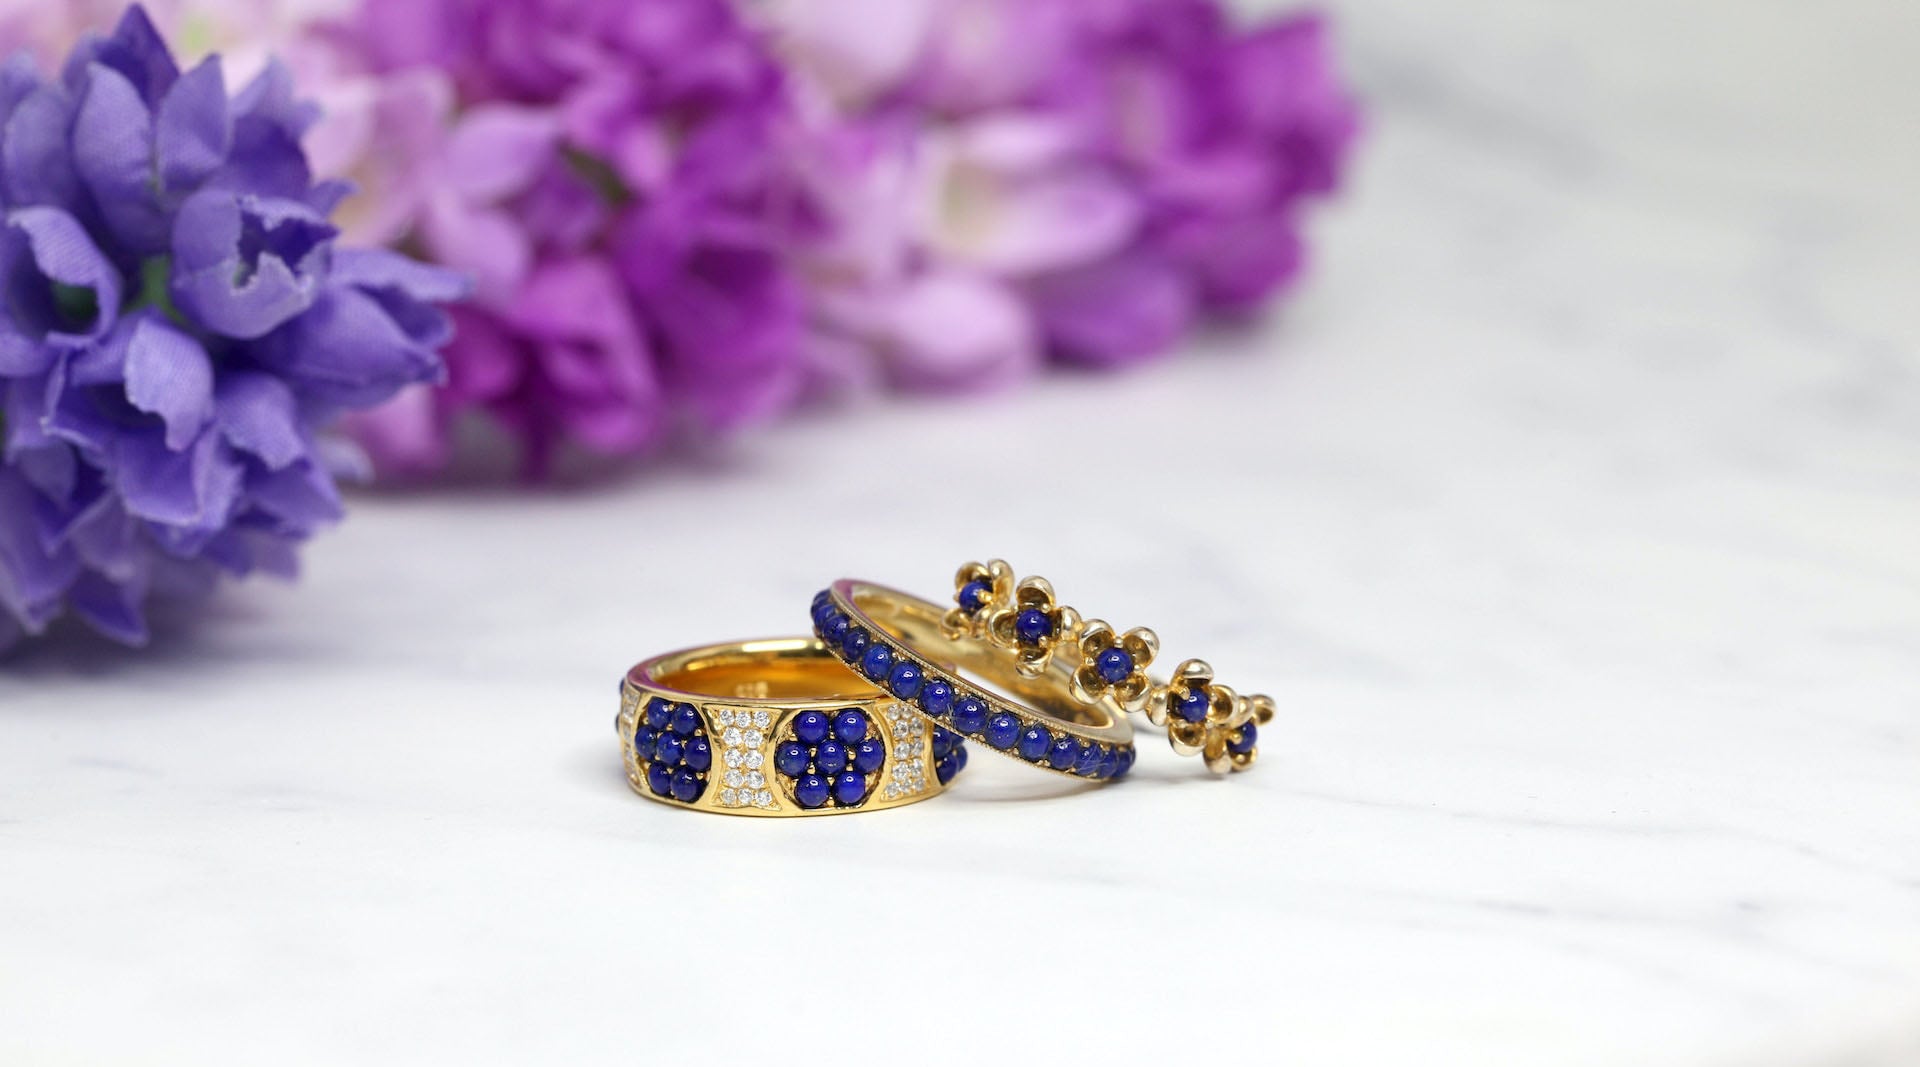 three gold-plated cz fashion rings on white surface with purple flowers at the background